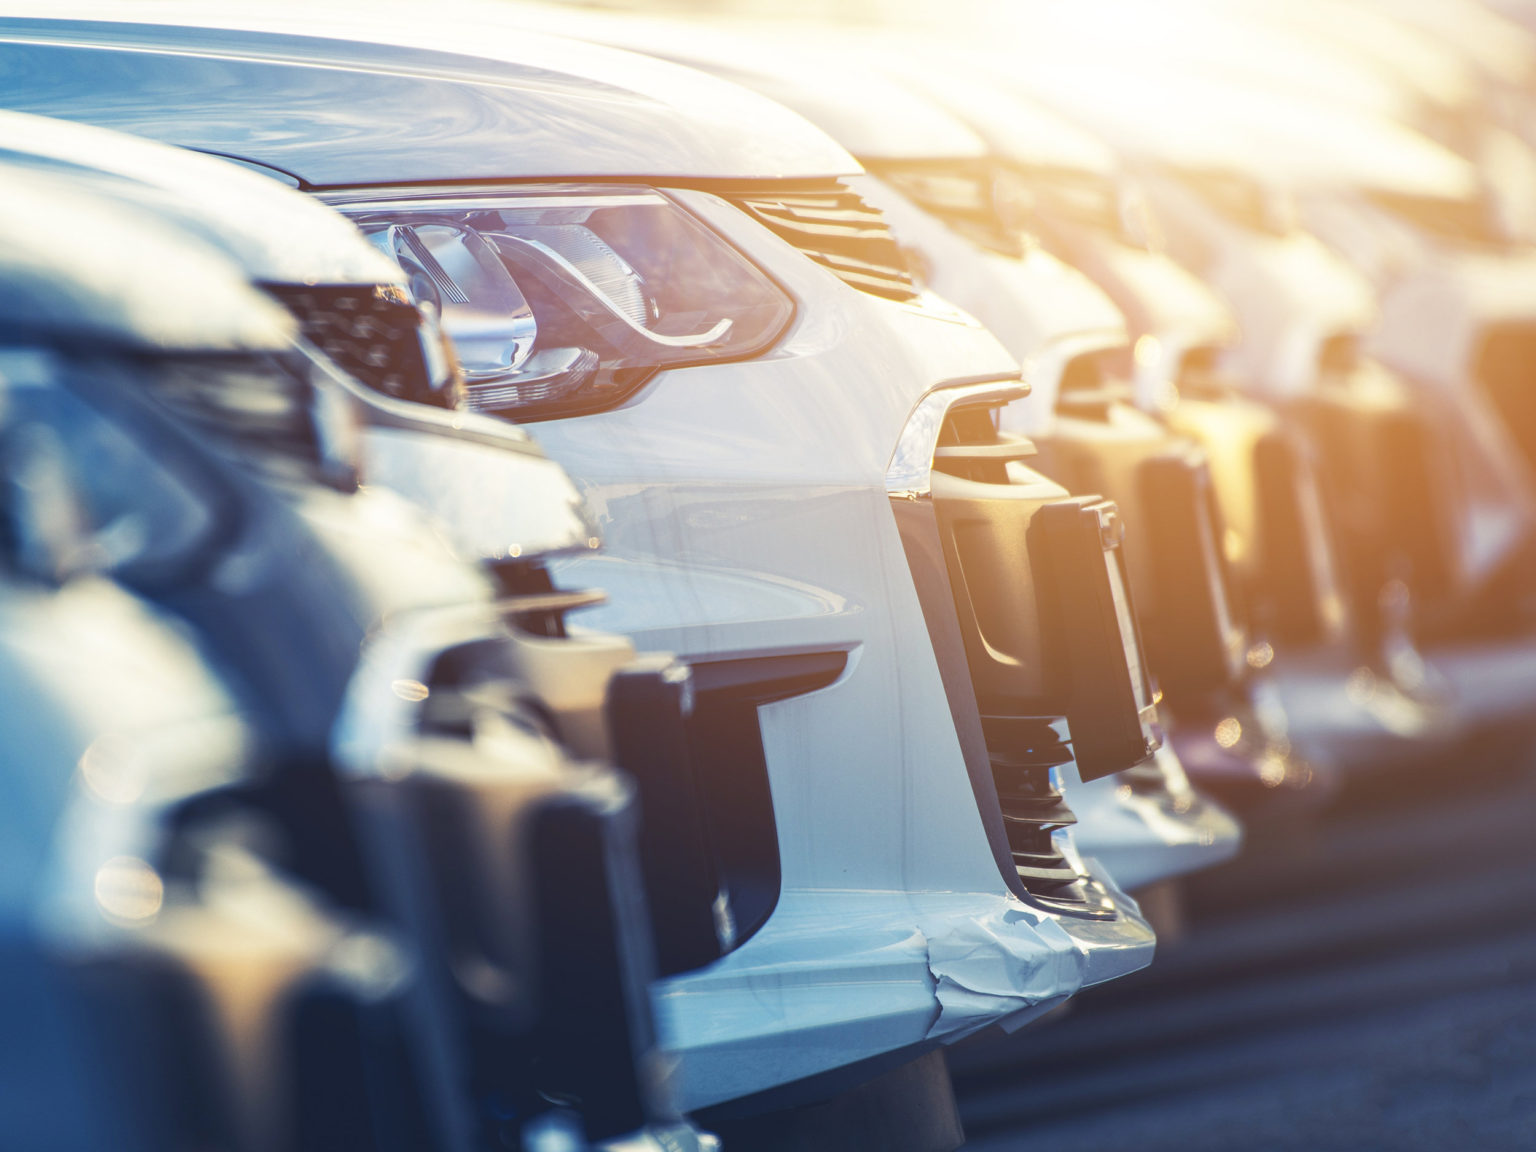 A new Autolist survey shows that American car buyers are still likely to buy a car in 2020, just not right now.